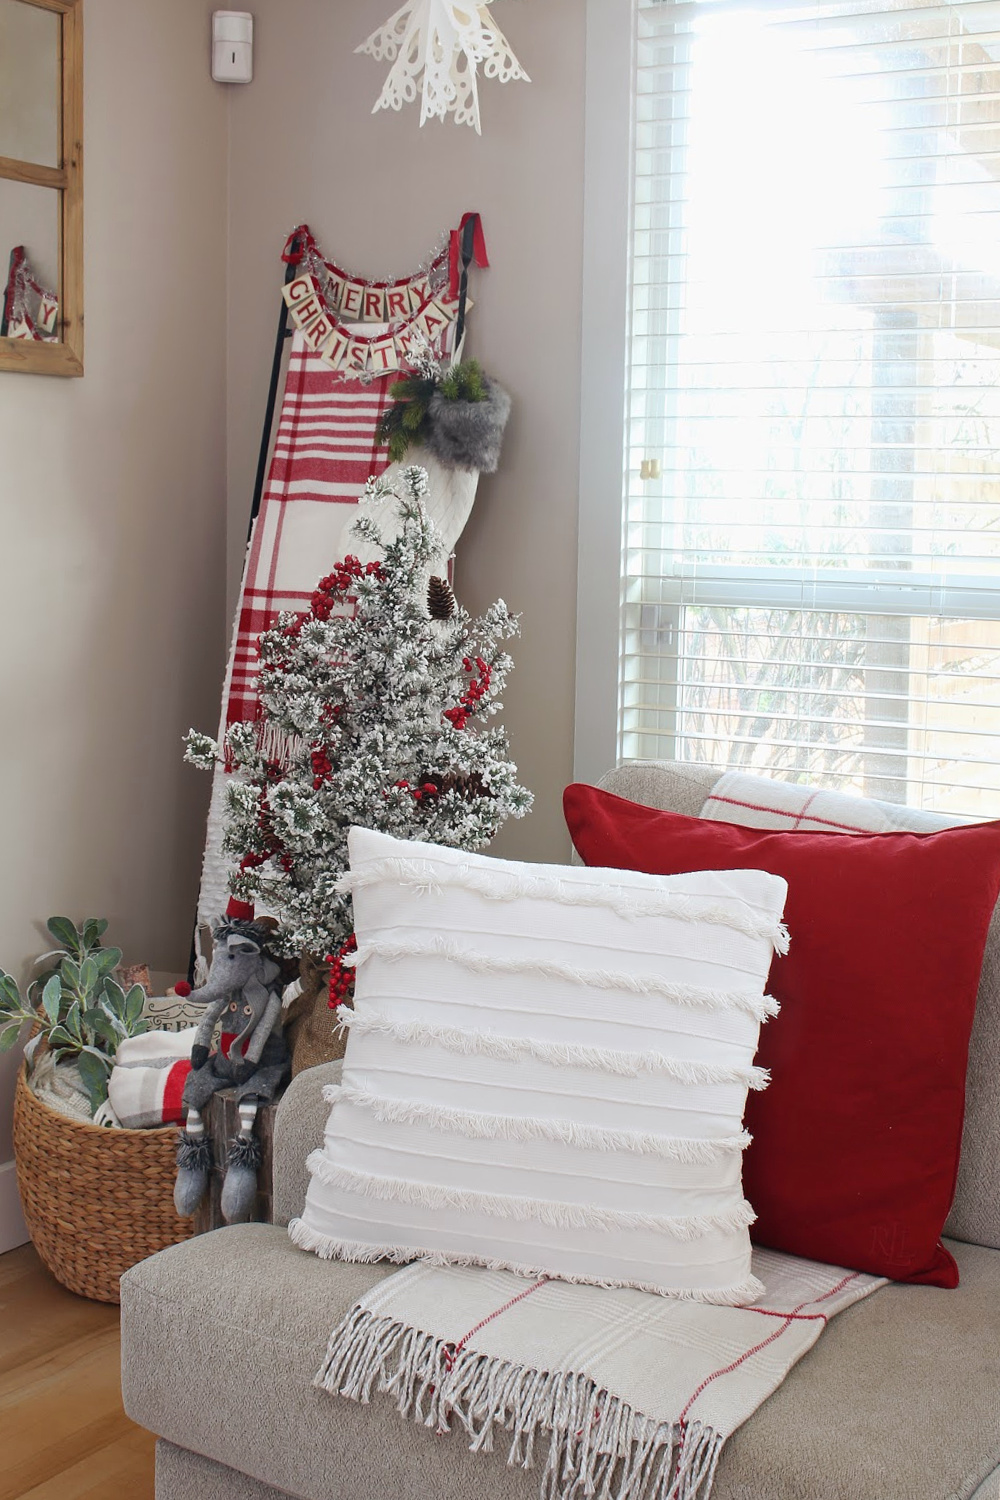 Festive living room with red and white pillows and throw blankets.